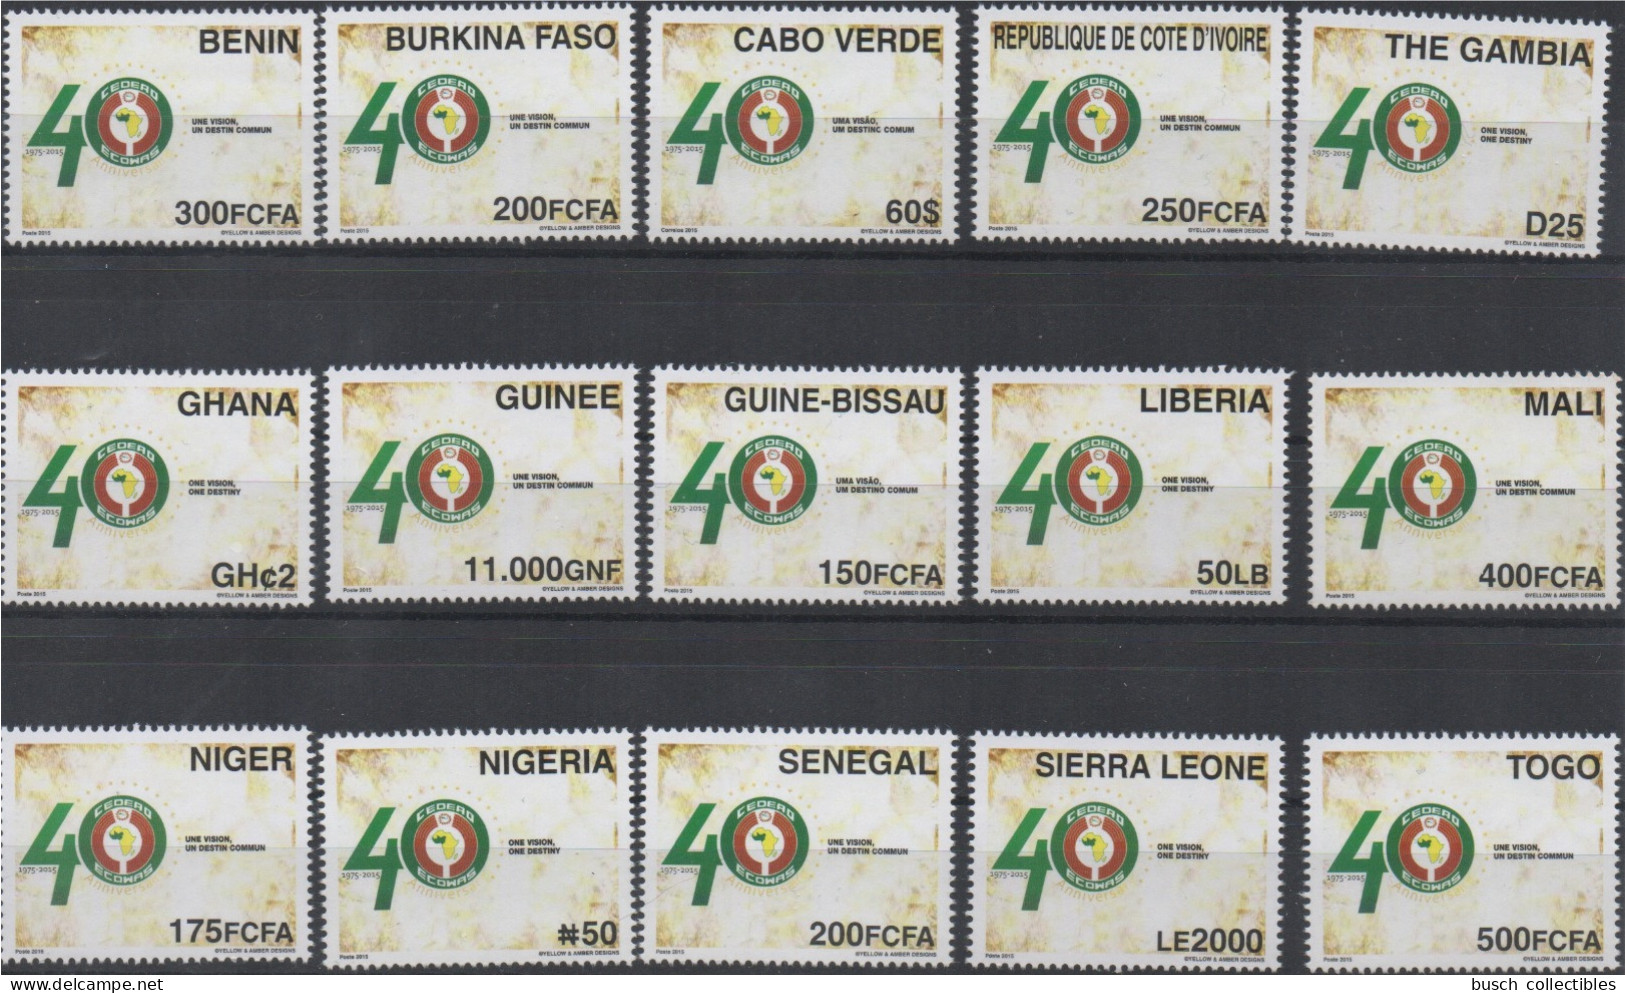 2015 Joint Issue Emission Commune CEDEAO ECOWAS 40 Years ALL 15 Countries MNH Benin Senegal Togo Nigeria Burkina Guine - Costa De Marfil (1960-...)